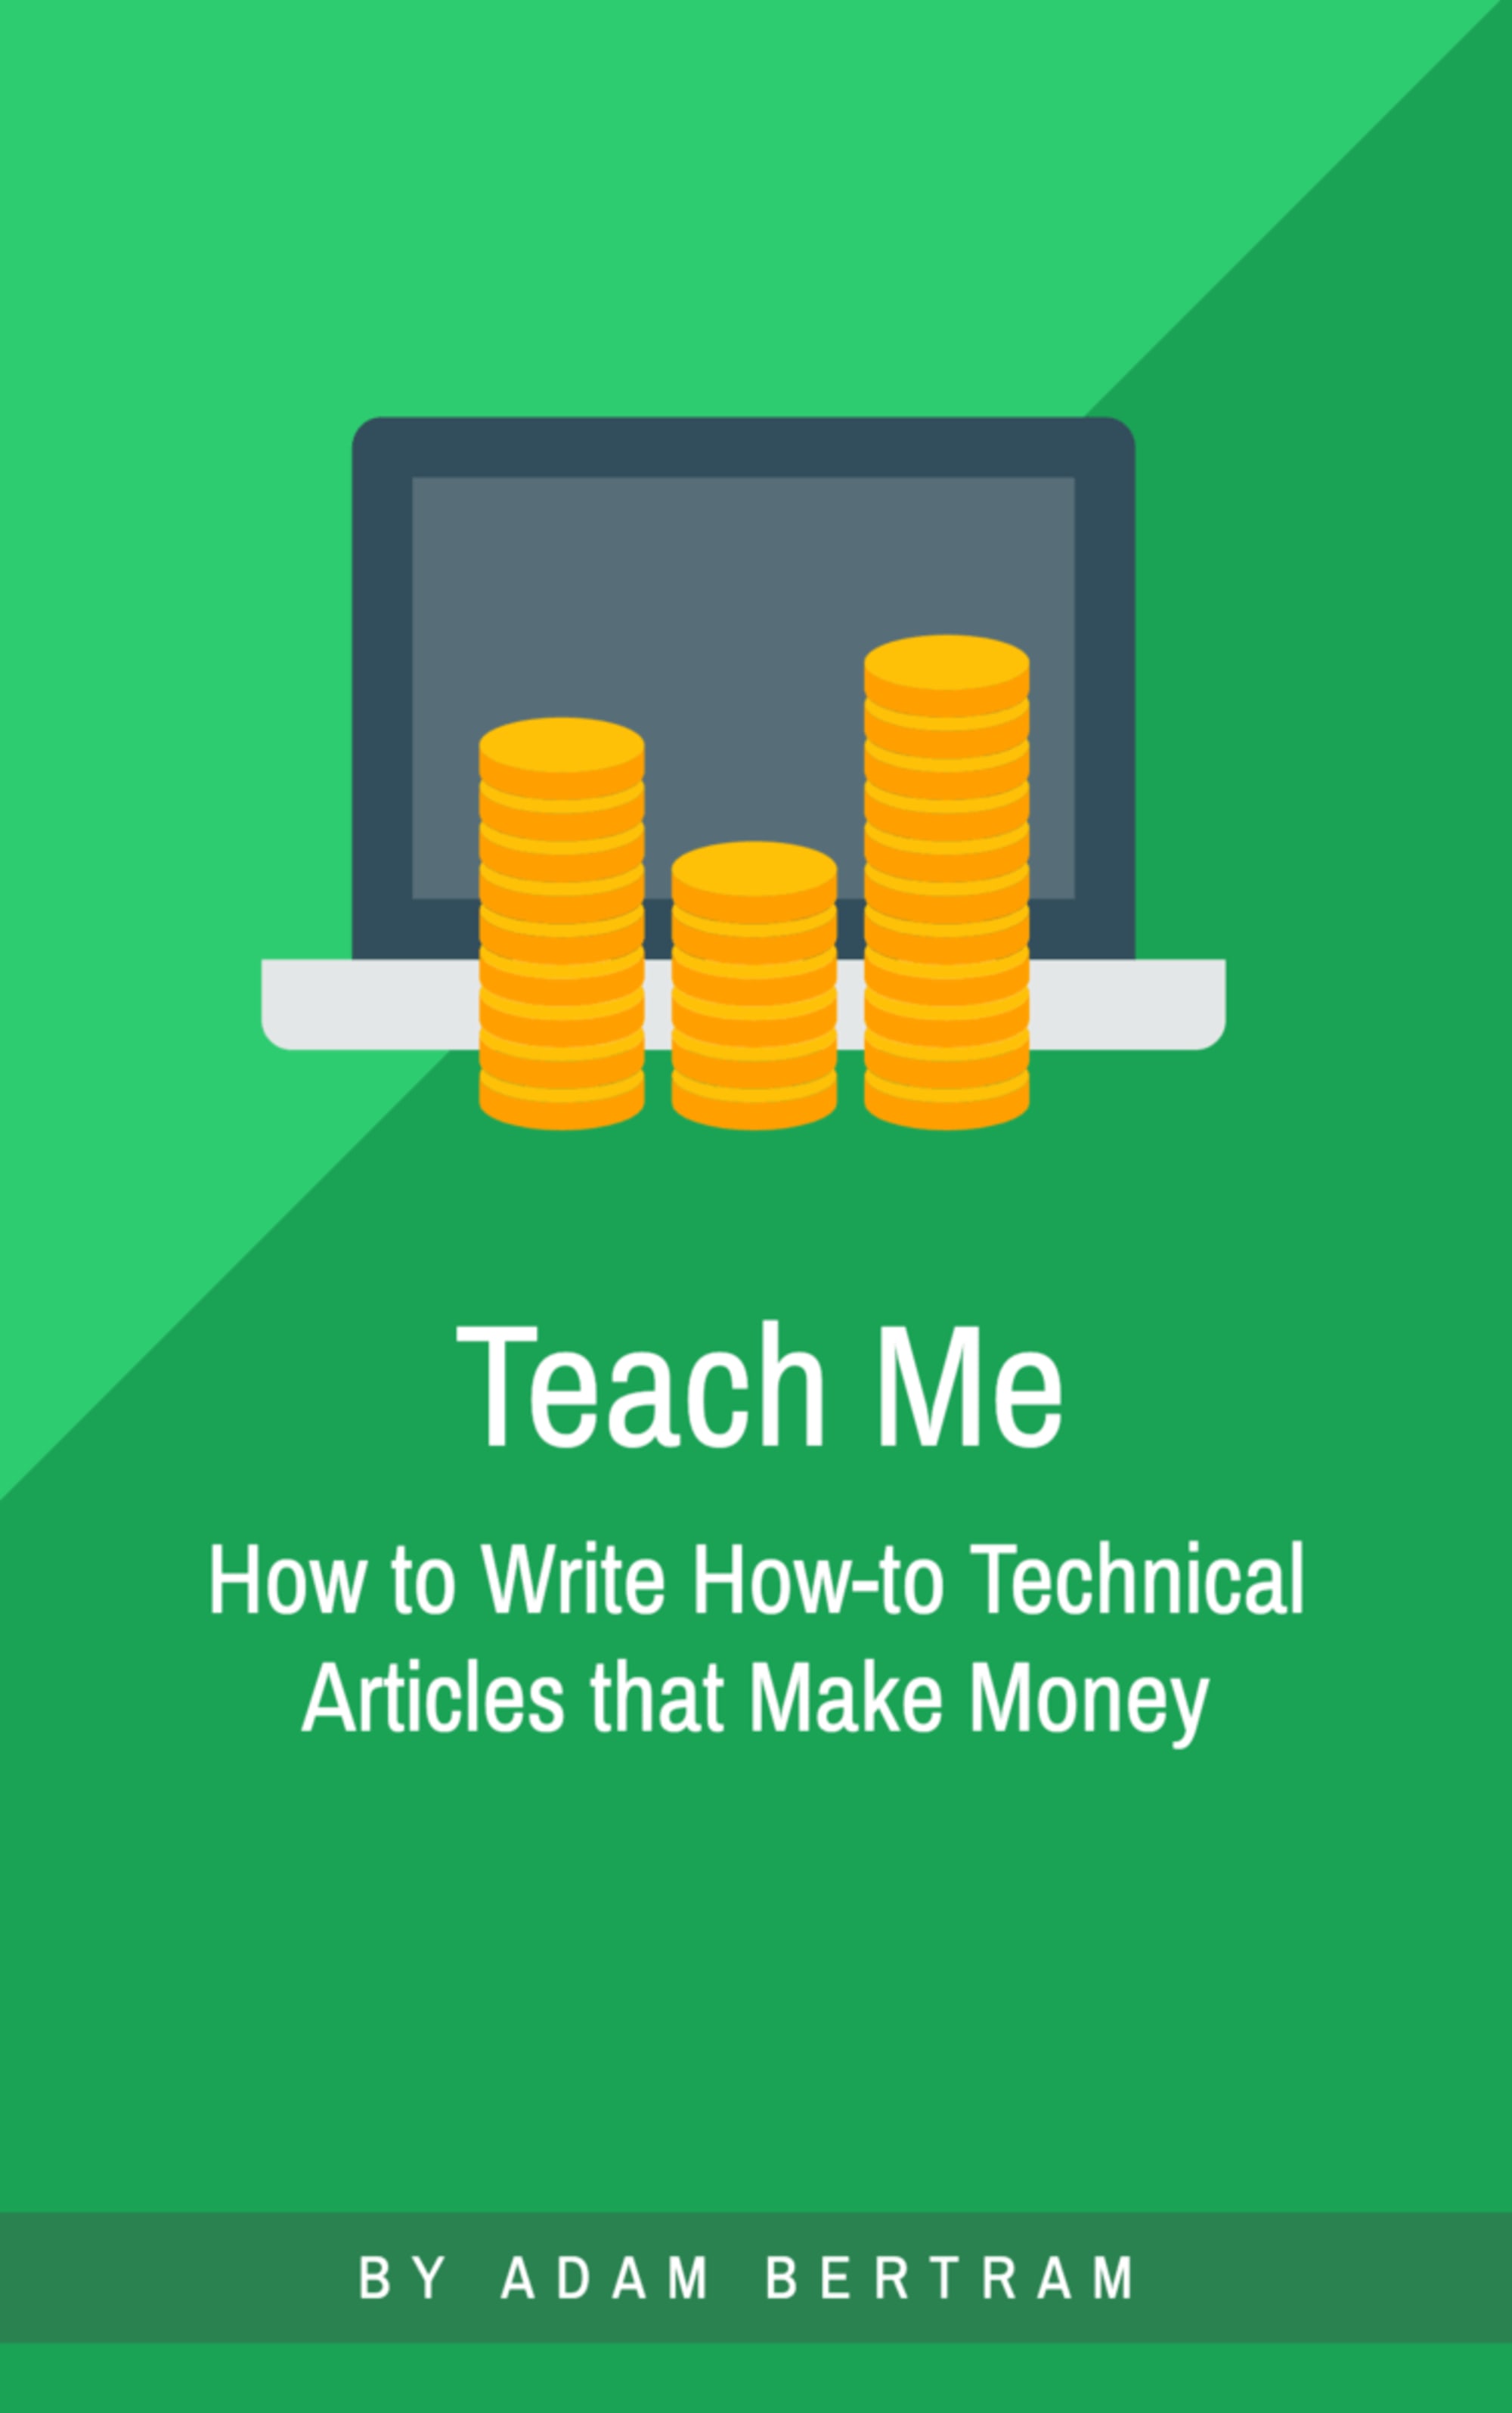 Teach Me: How to Write How-To Technical Articles that Make Money